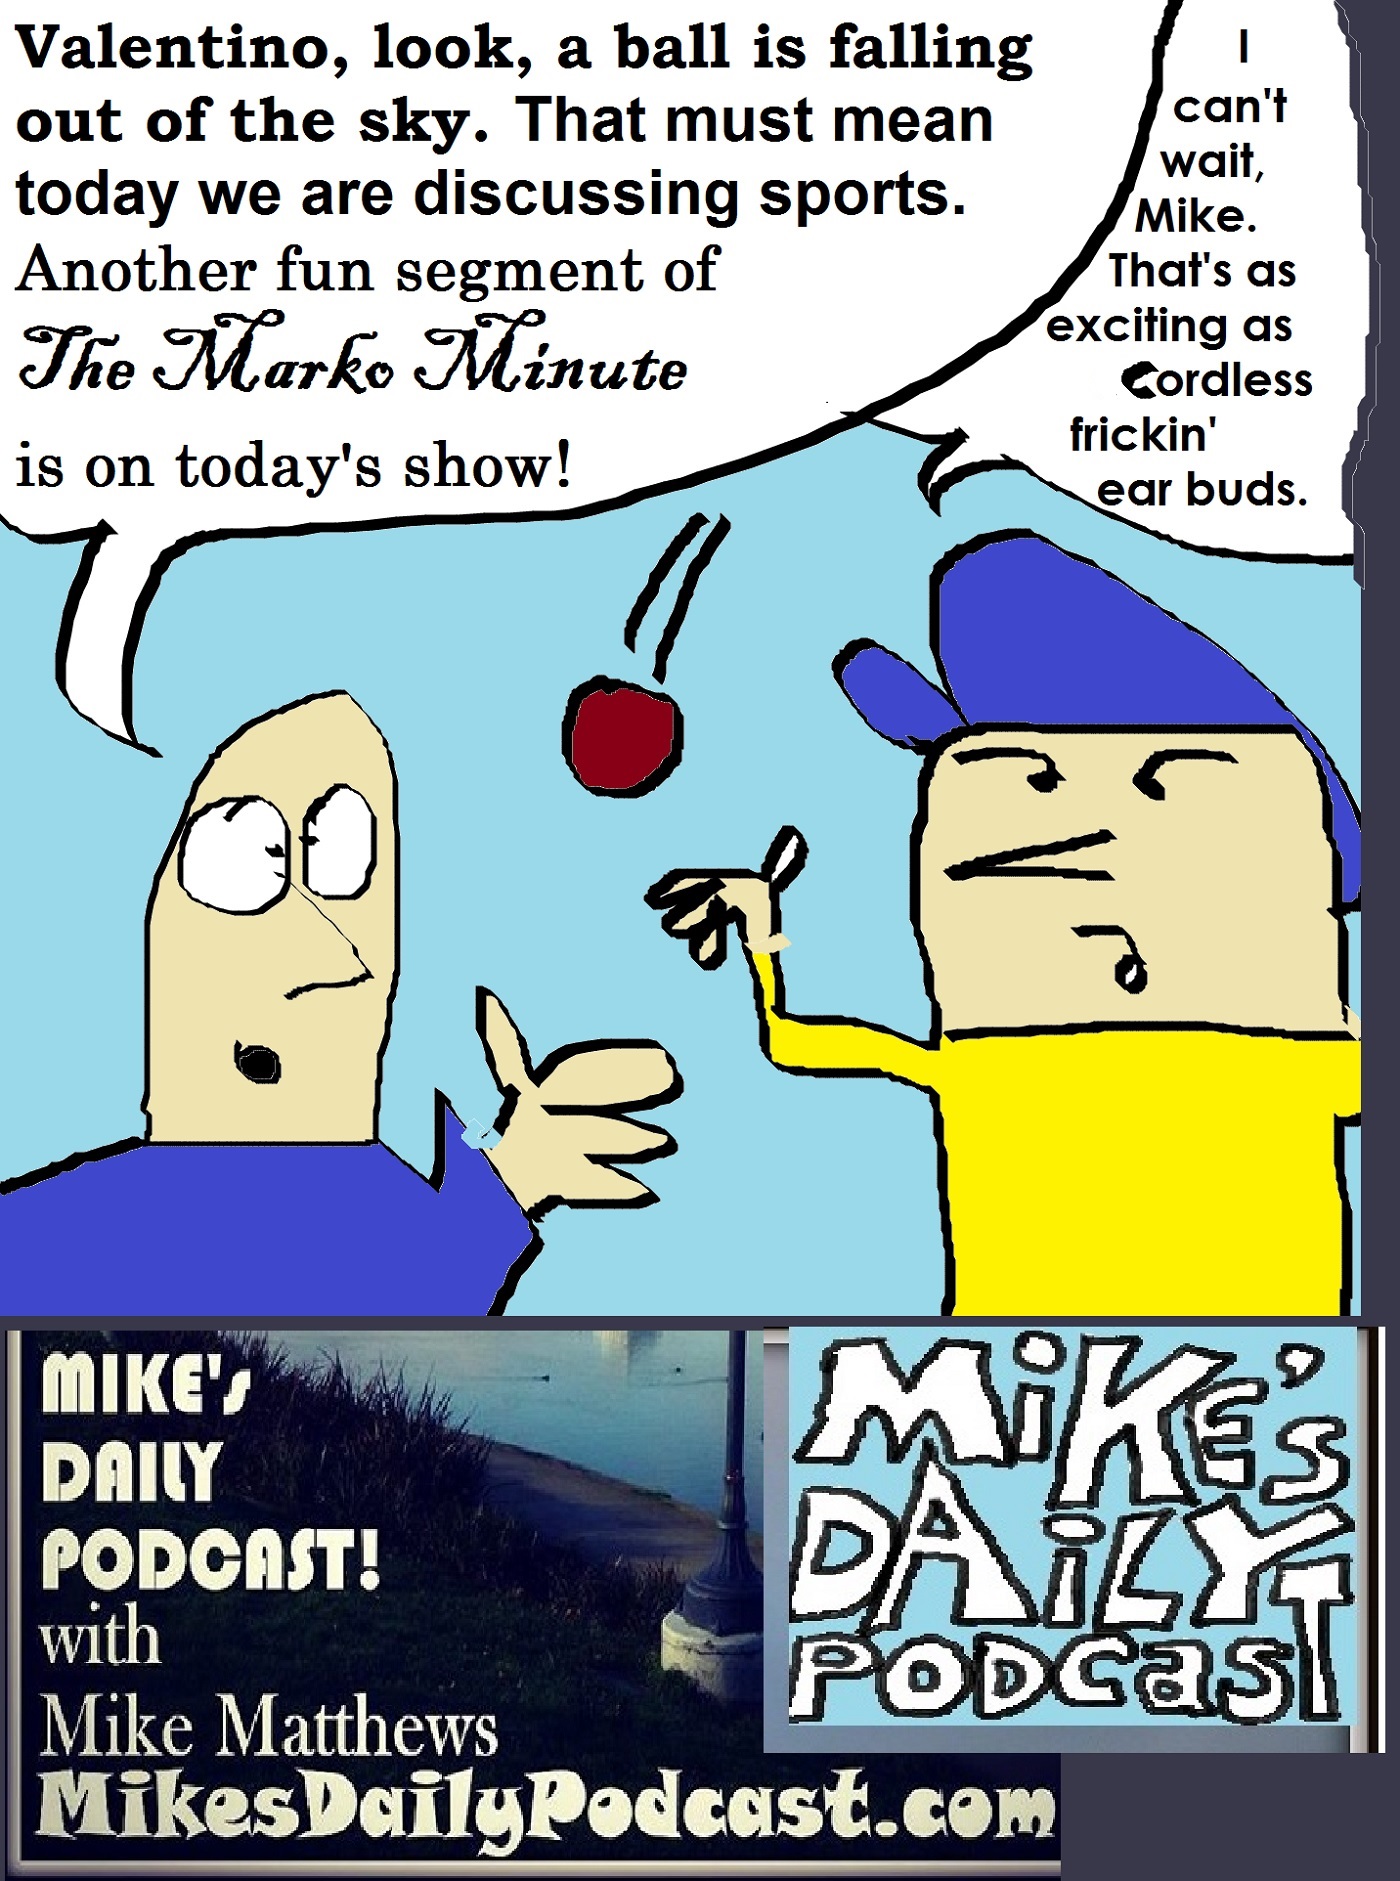 mikes-daily-podcast-1171-valentino-sports-ear-buds